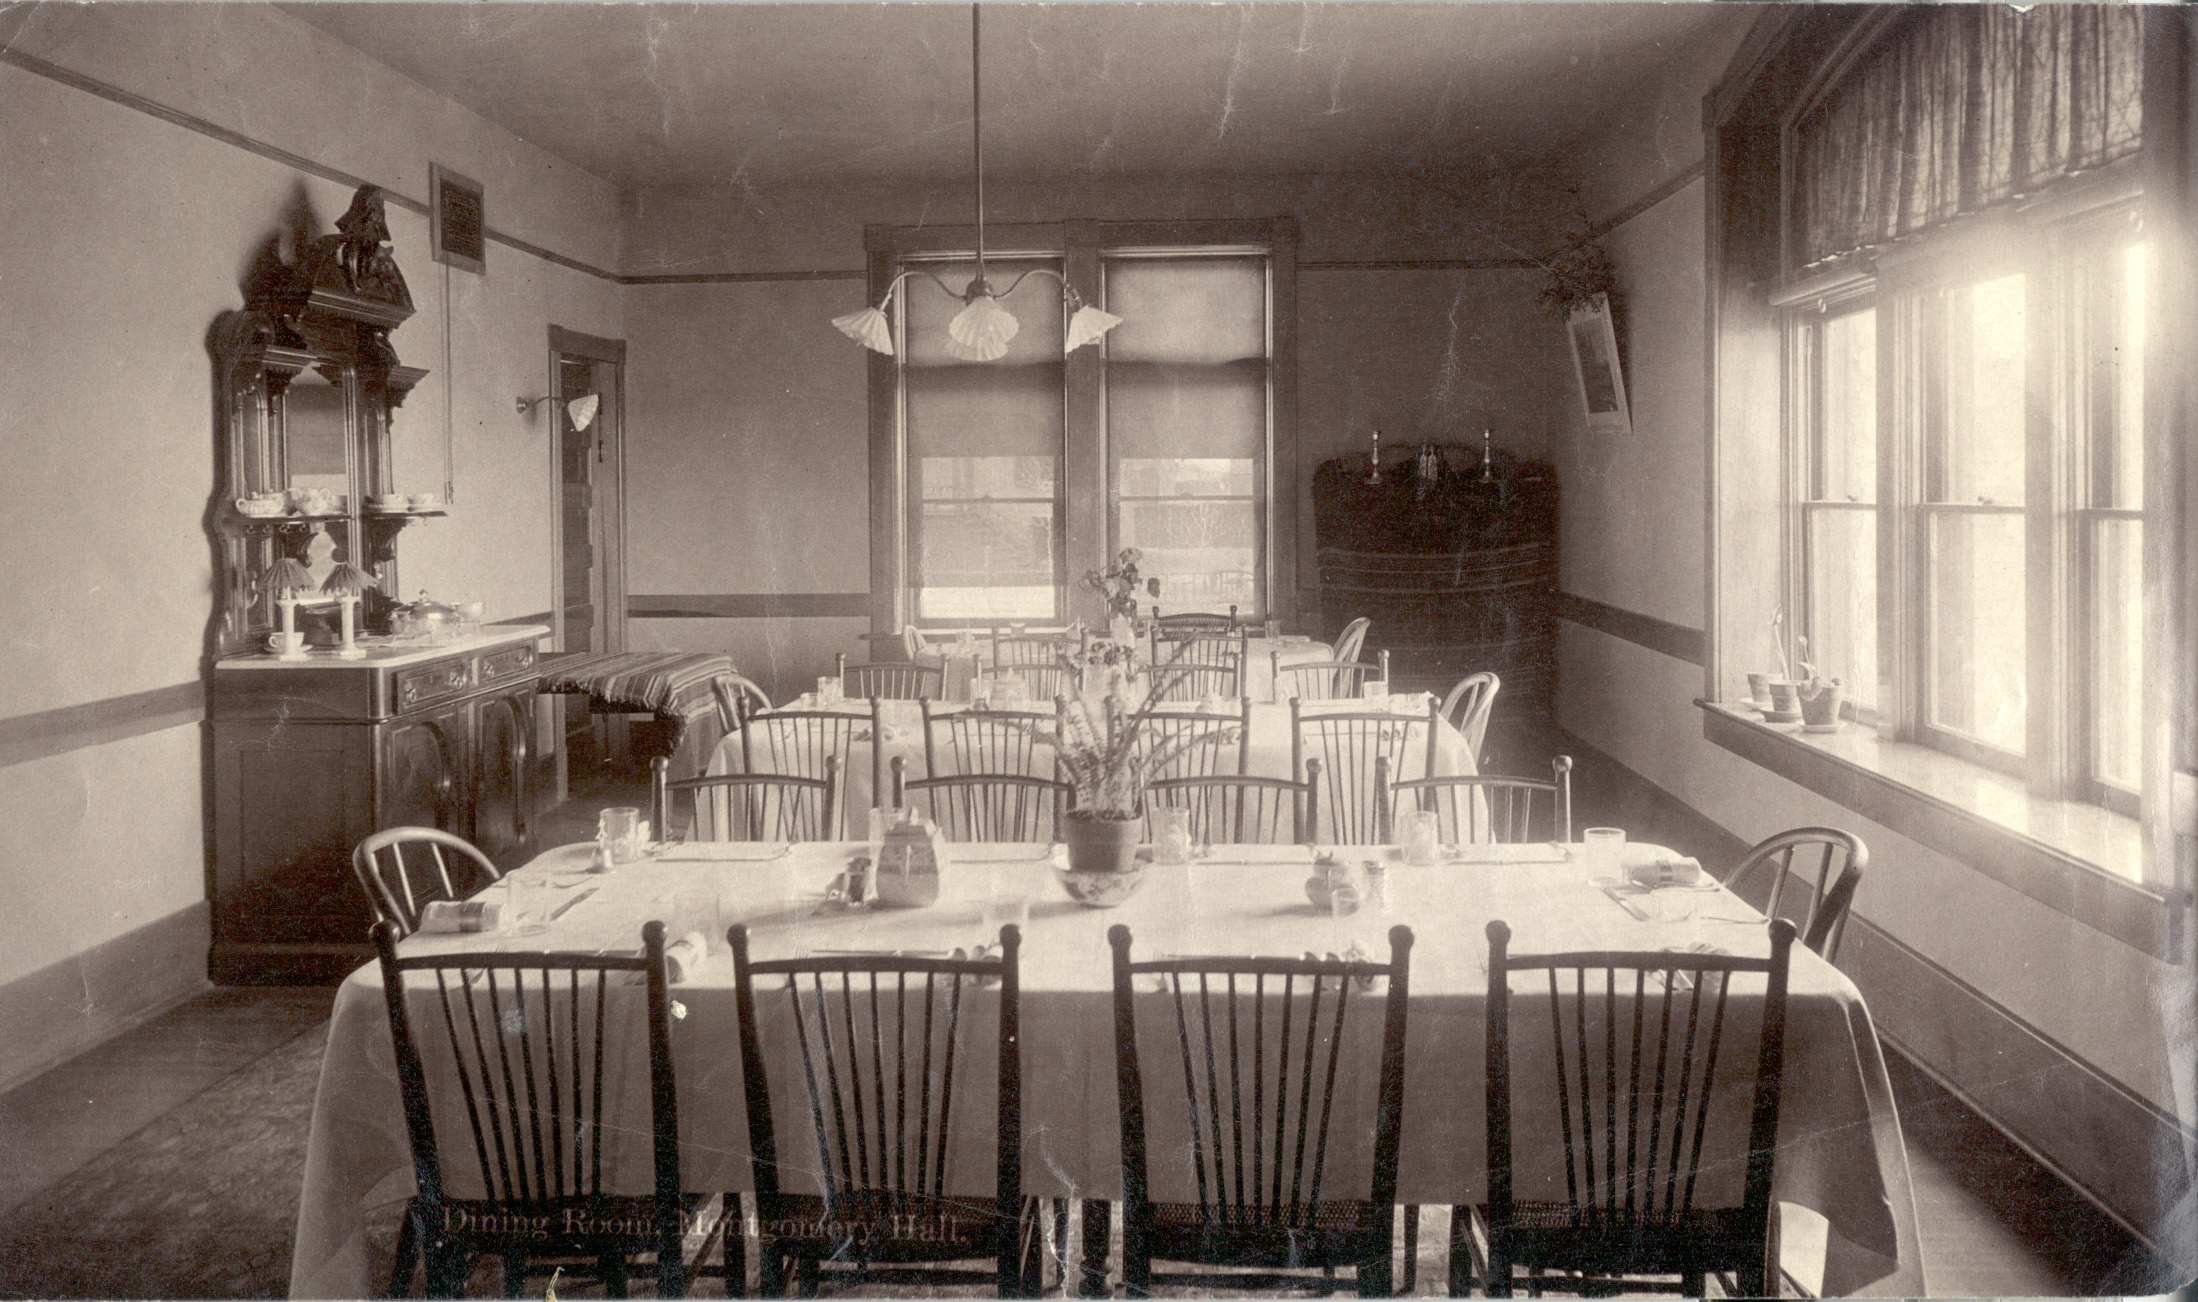 Montgomery Hall dining room <span class="cc-gallery-credit"></span>